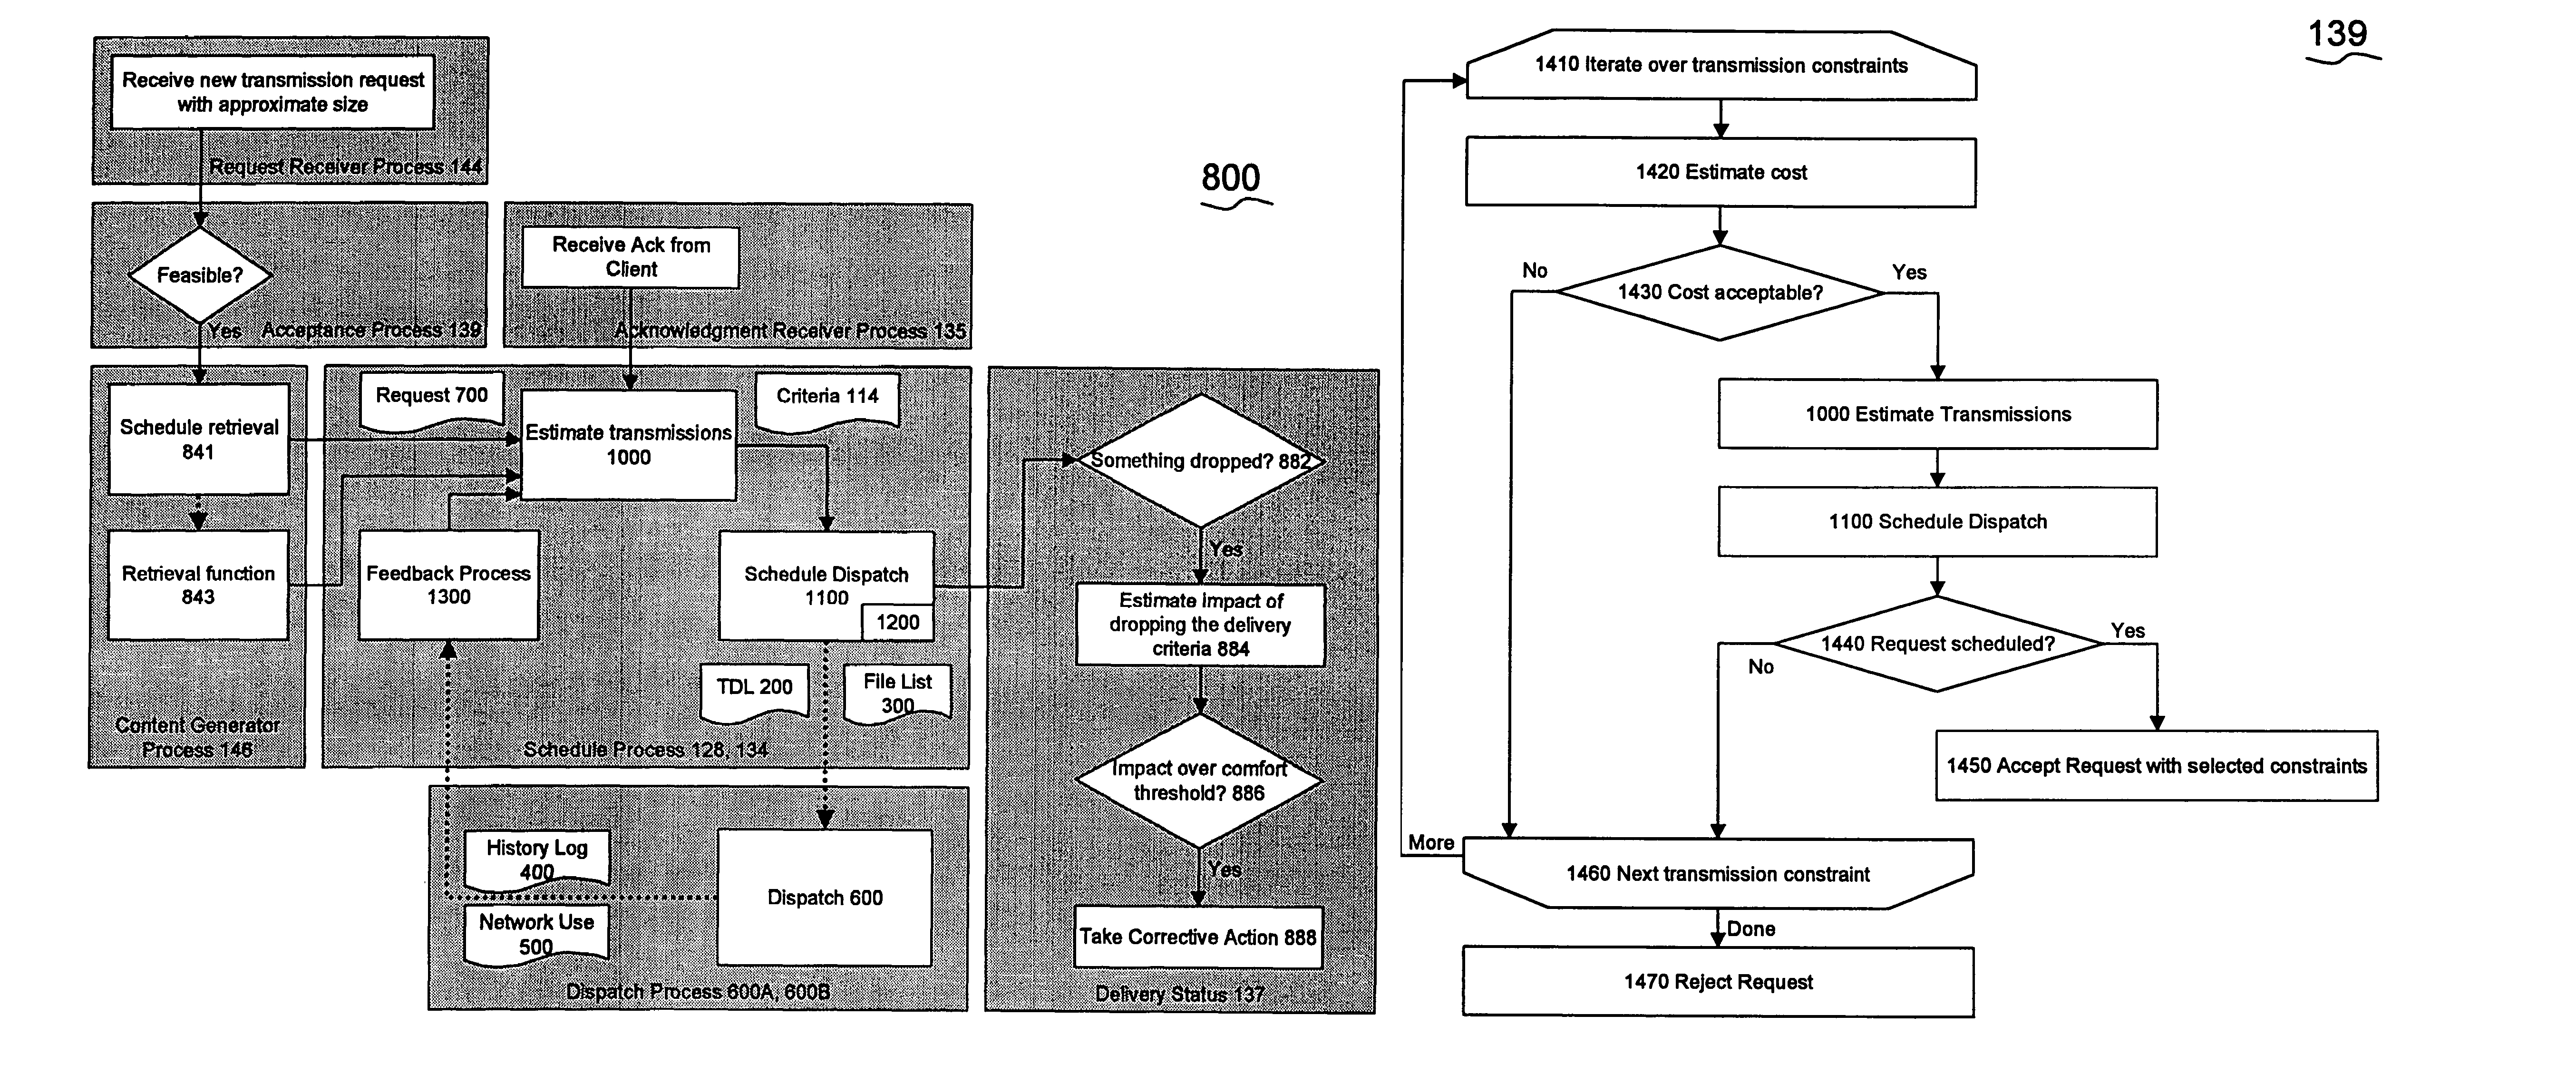 Method of doing business over a network by transmission and retransmission of digital information on a network during time slots